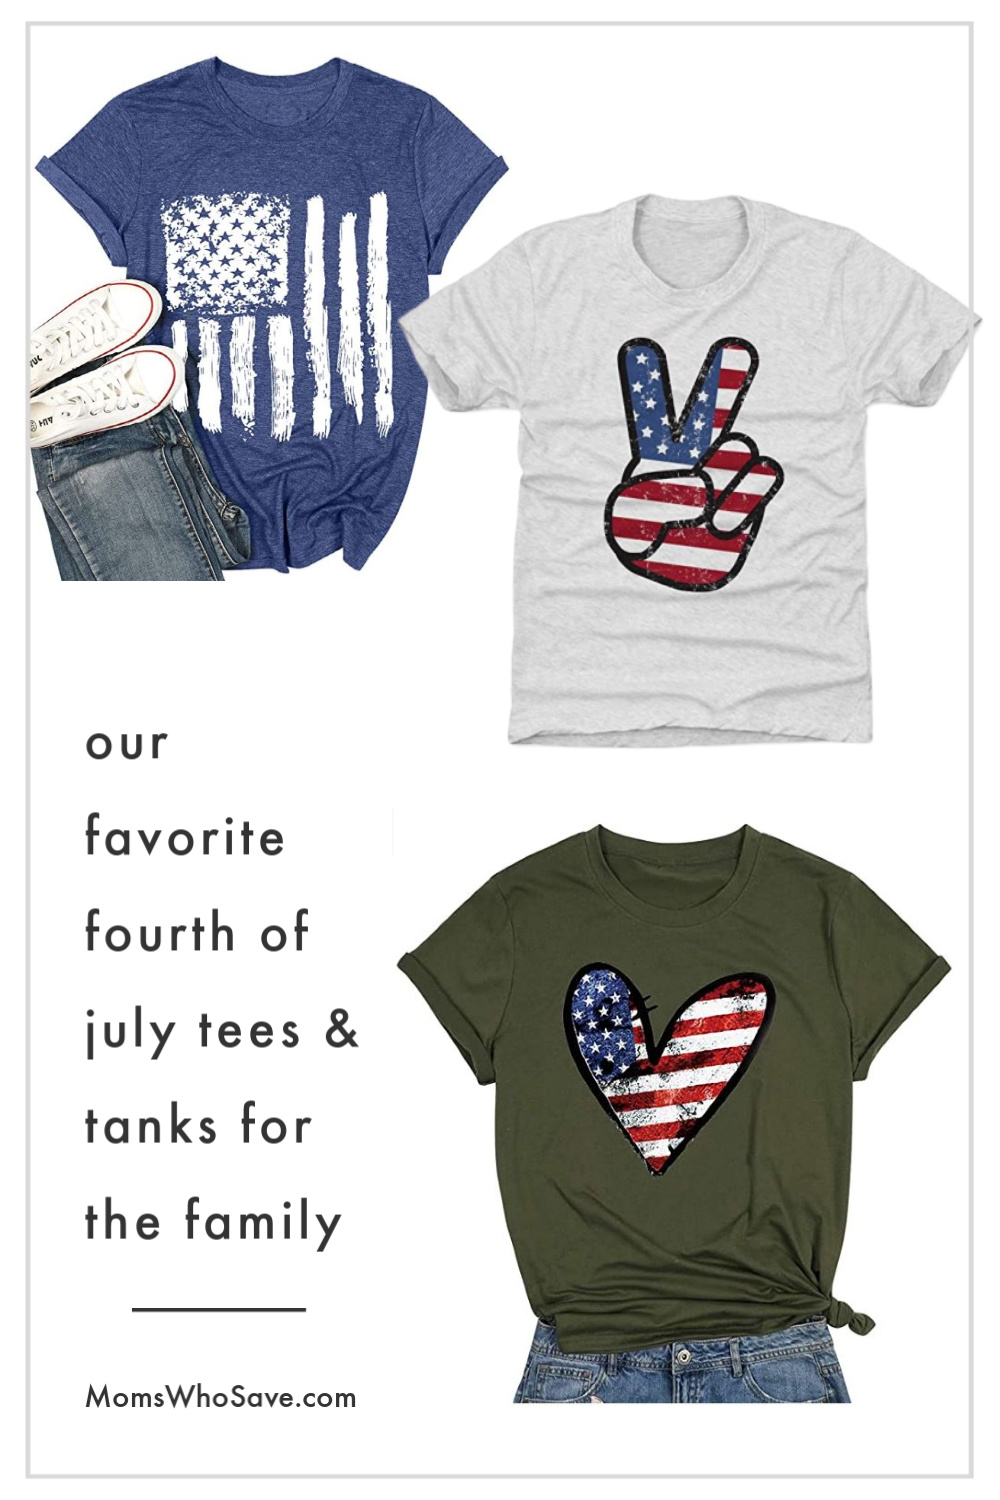 Look Fabulous & Celebrate this 4th Of July with Vinyl Shirts!